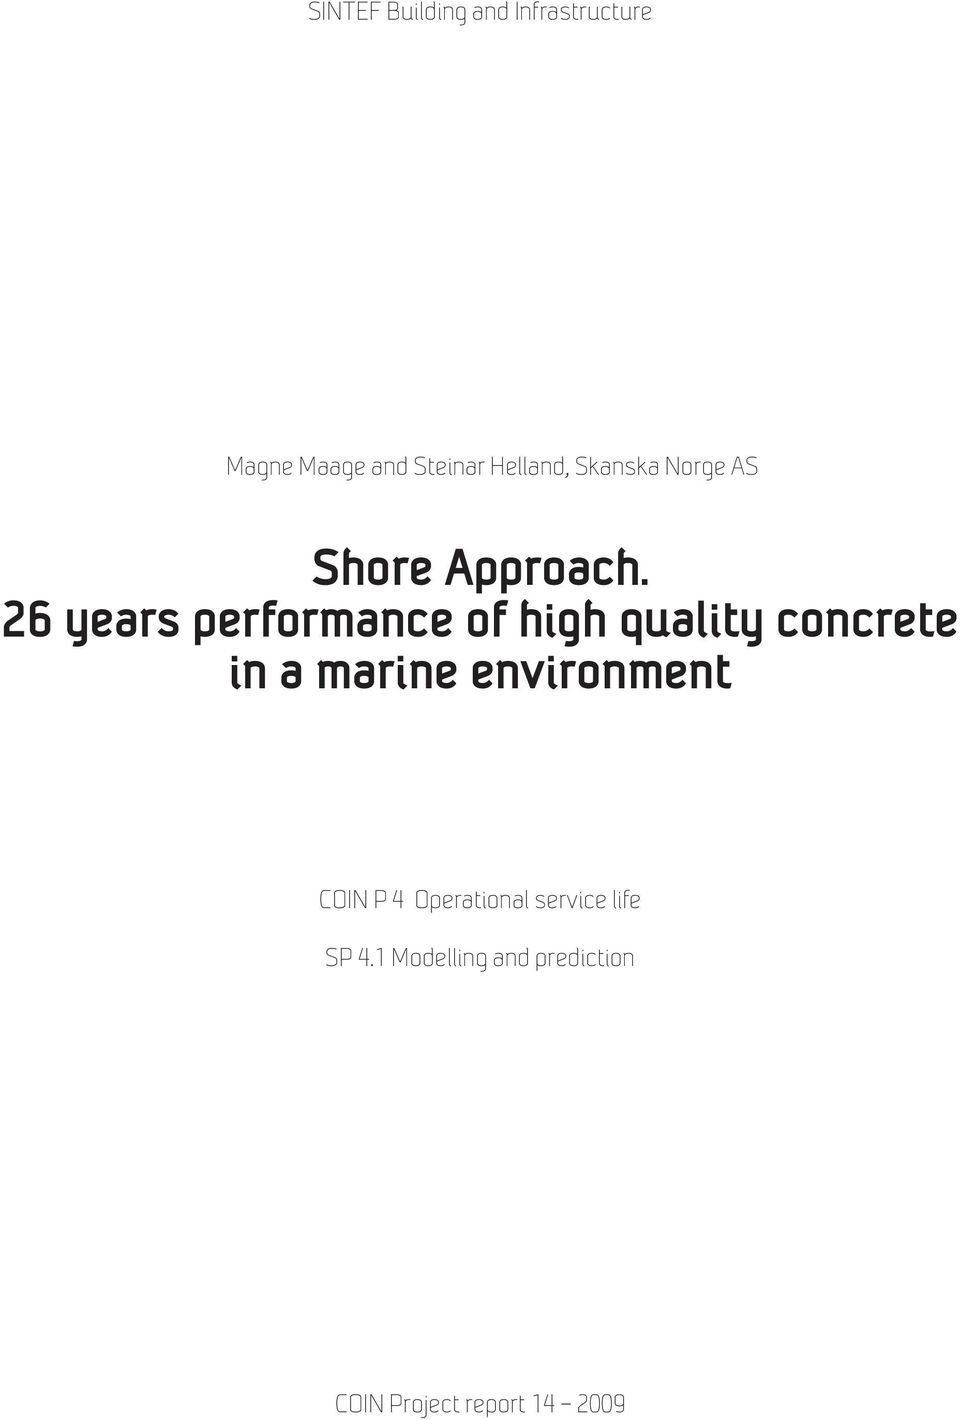 26 years performance of high quality concrete in a marine